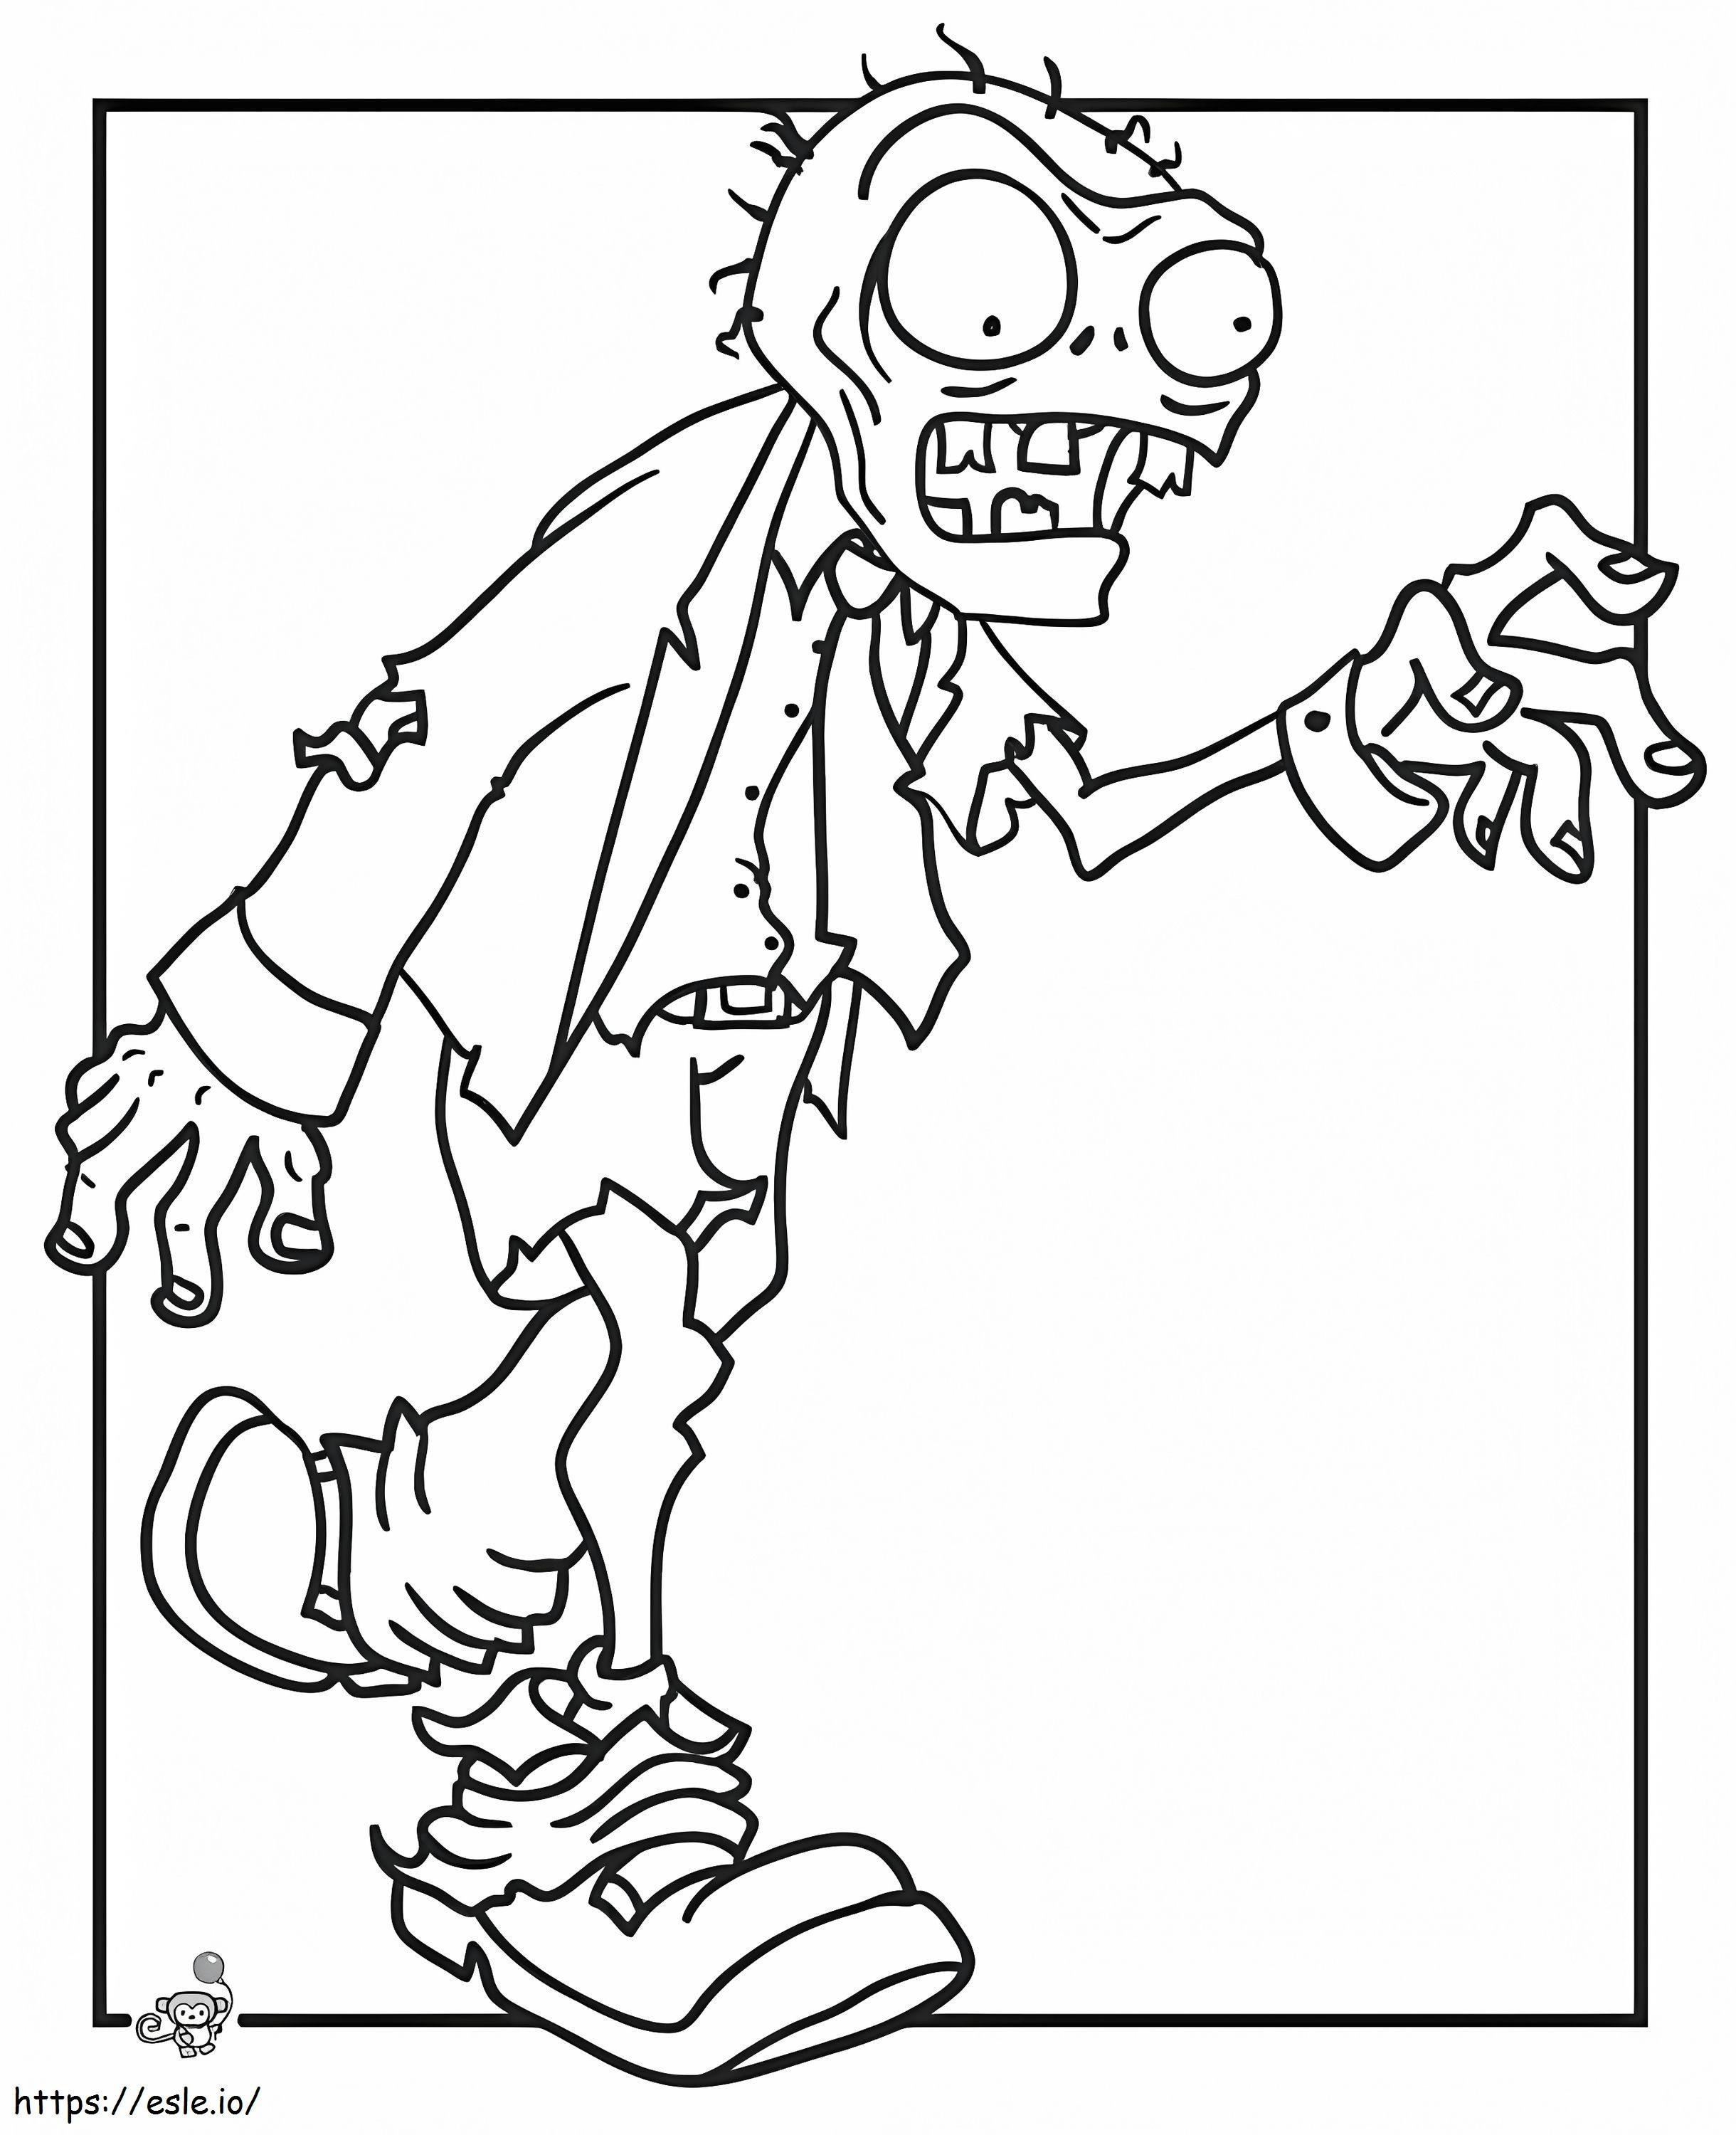 Walking Zombie In Plants Vs. Zombies coloring page